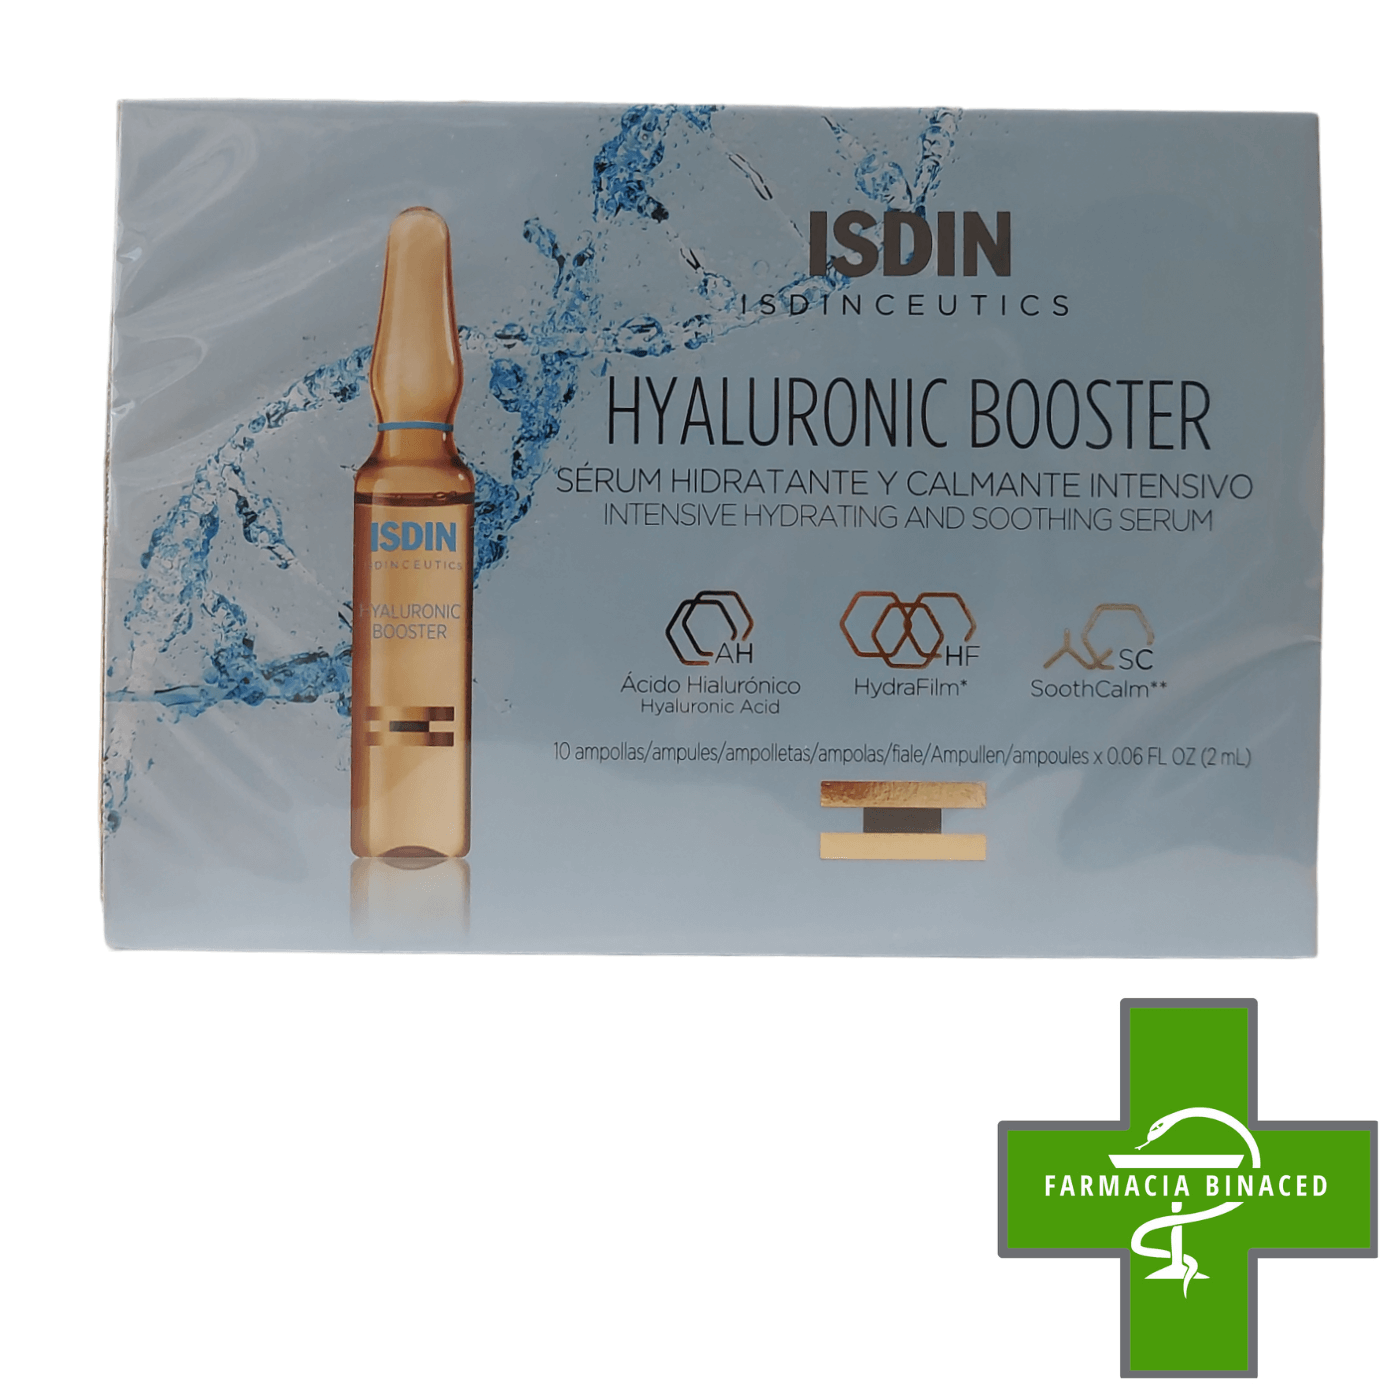 ISDINCEUTICS HYALURONIC BOOSTER 10 AMPOLLAS_2